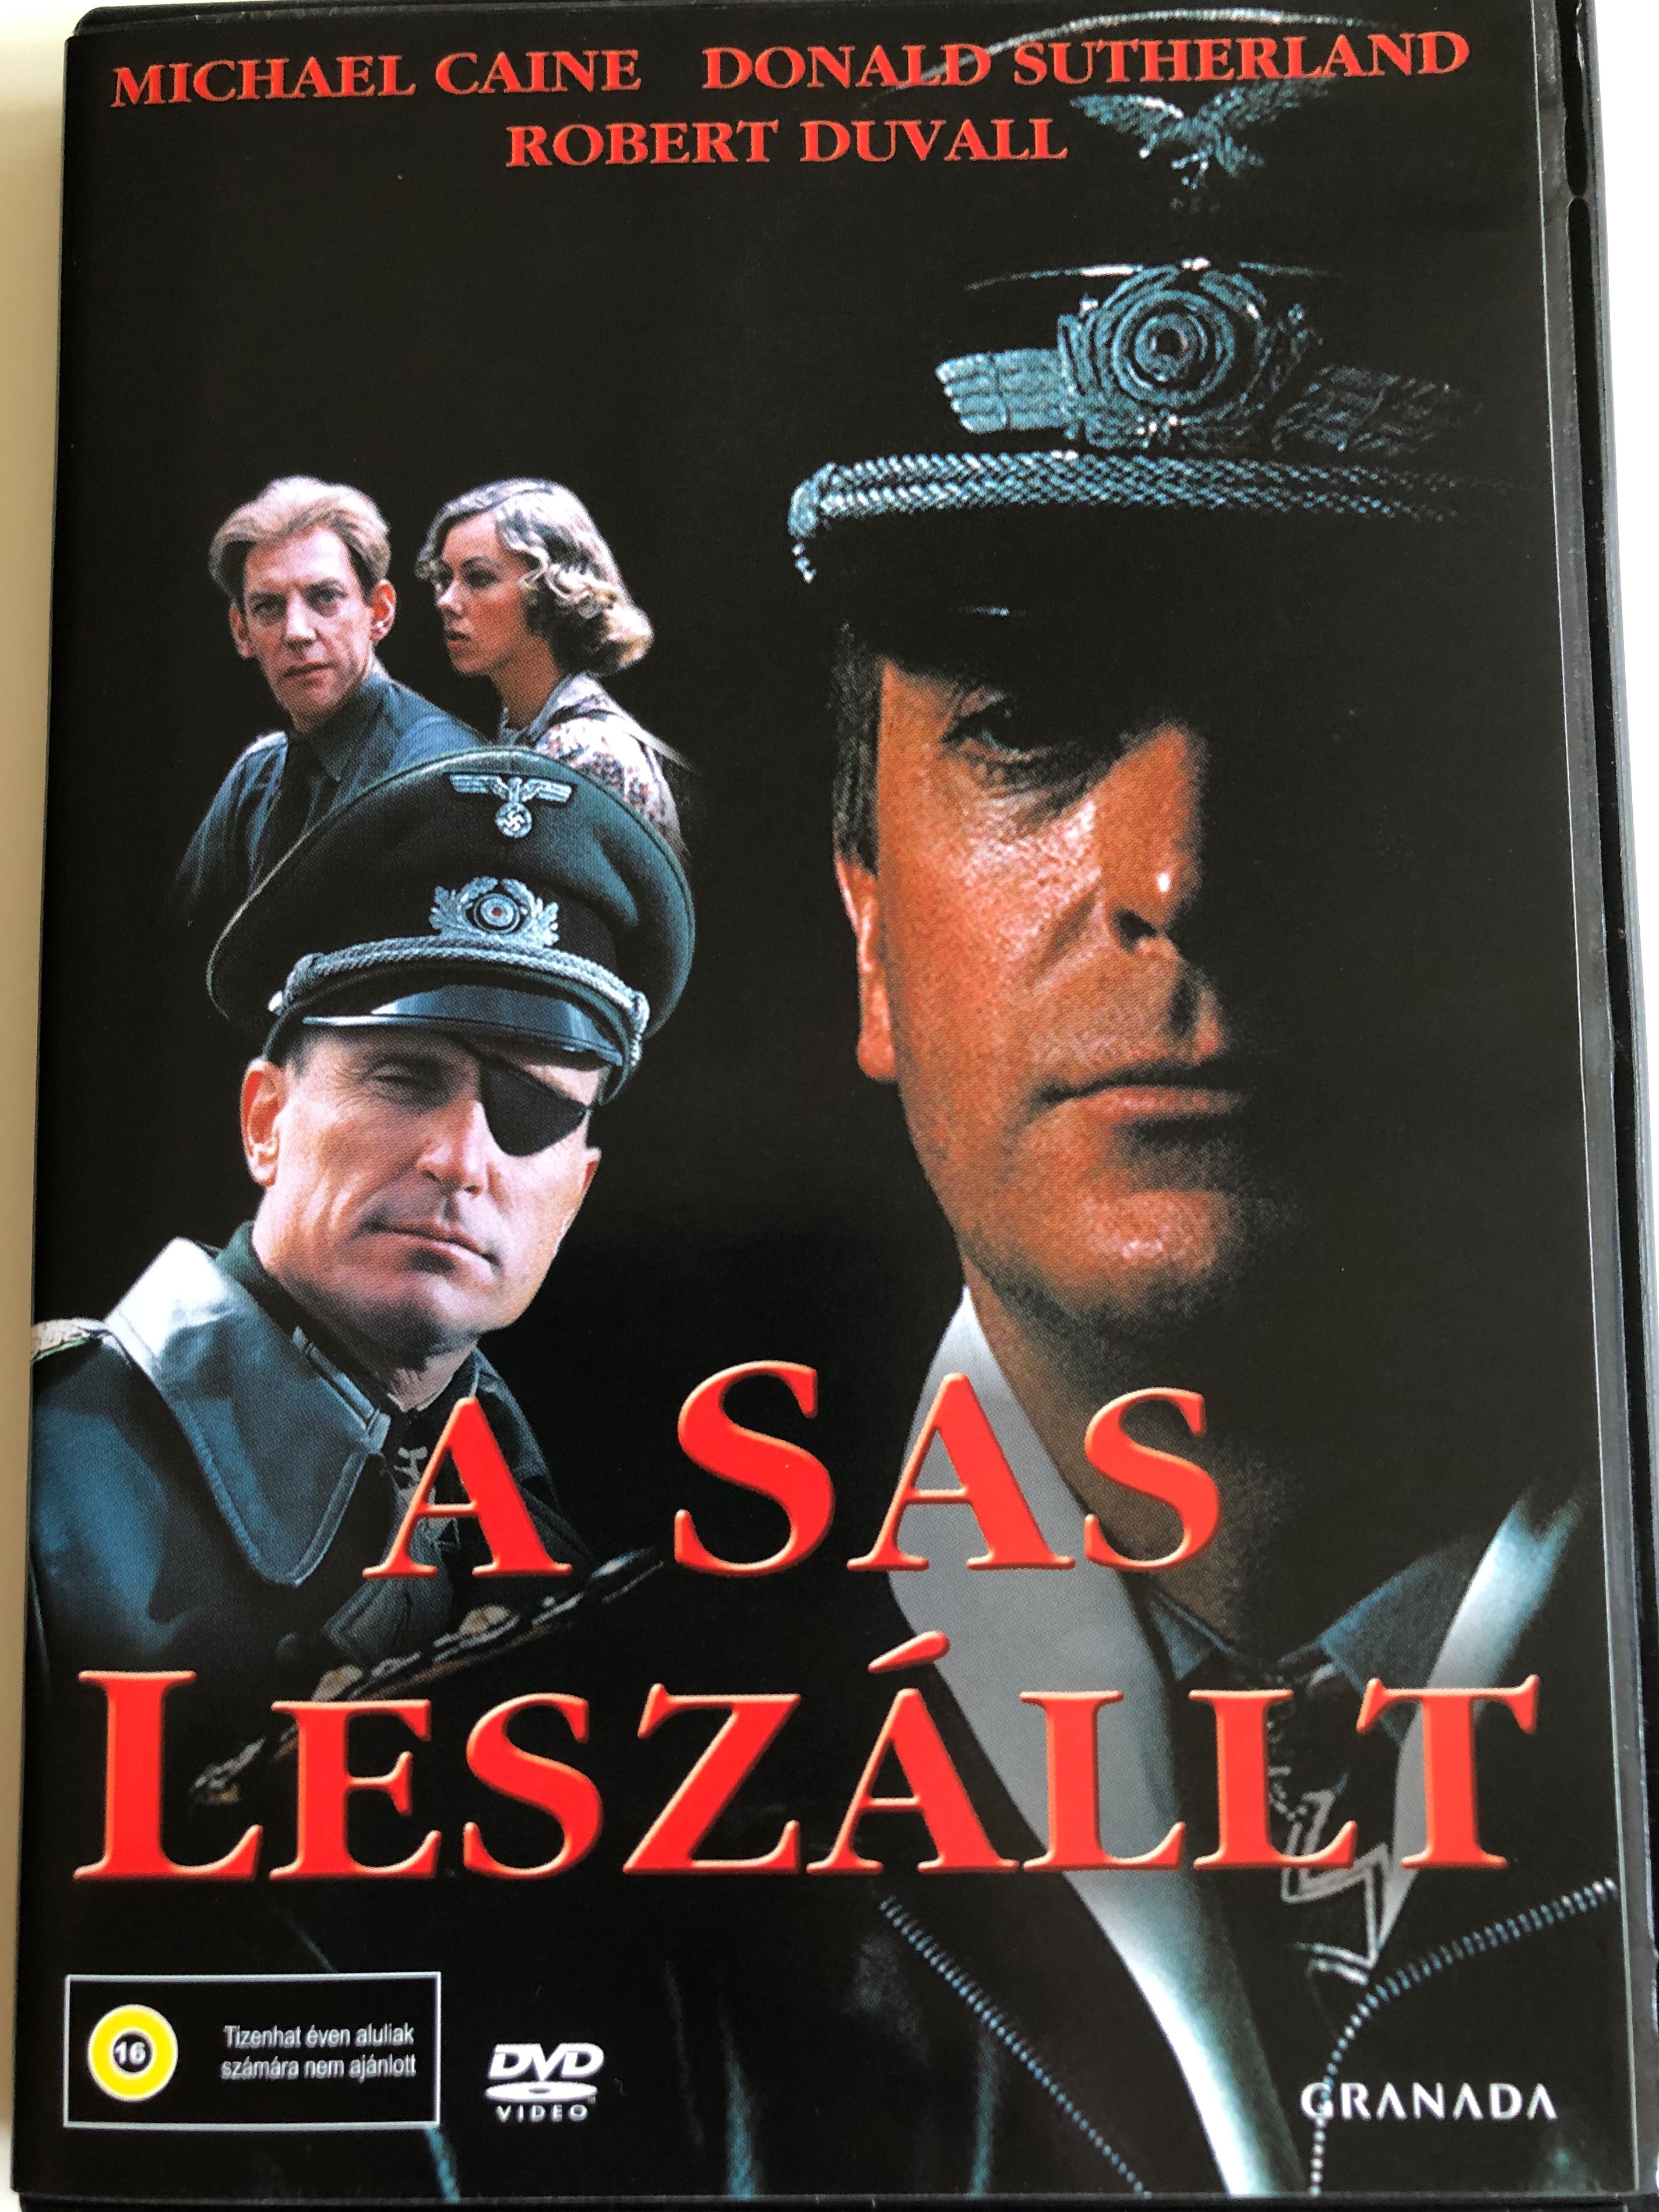 the-eagle-has-landed-dvd-1976-a-sas-lesz-llt-directed-by-john-sturges-starring-michael-caine-donald-sutherland-robert-duvall-1-.jpg